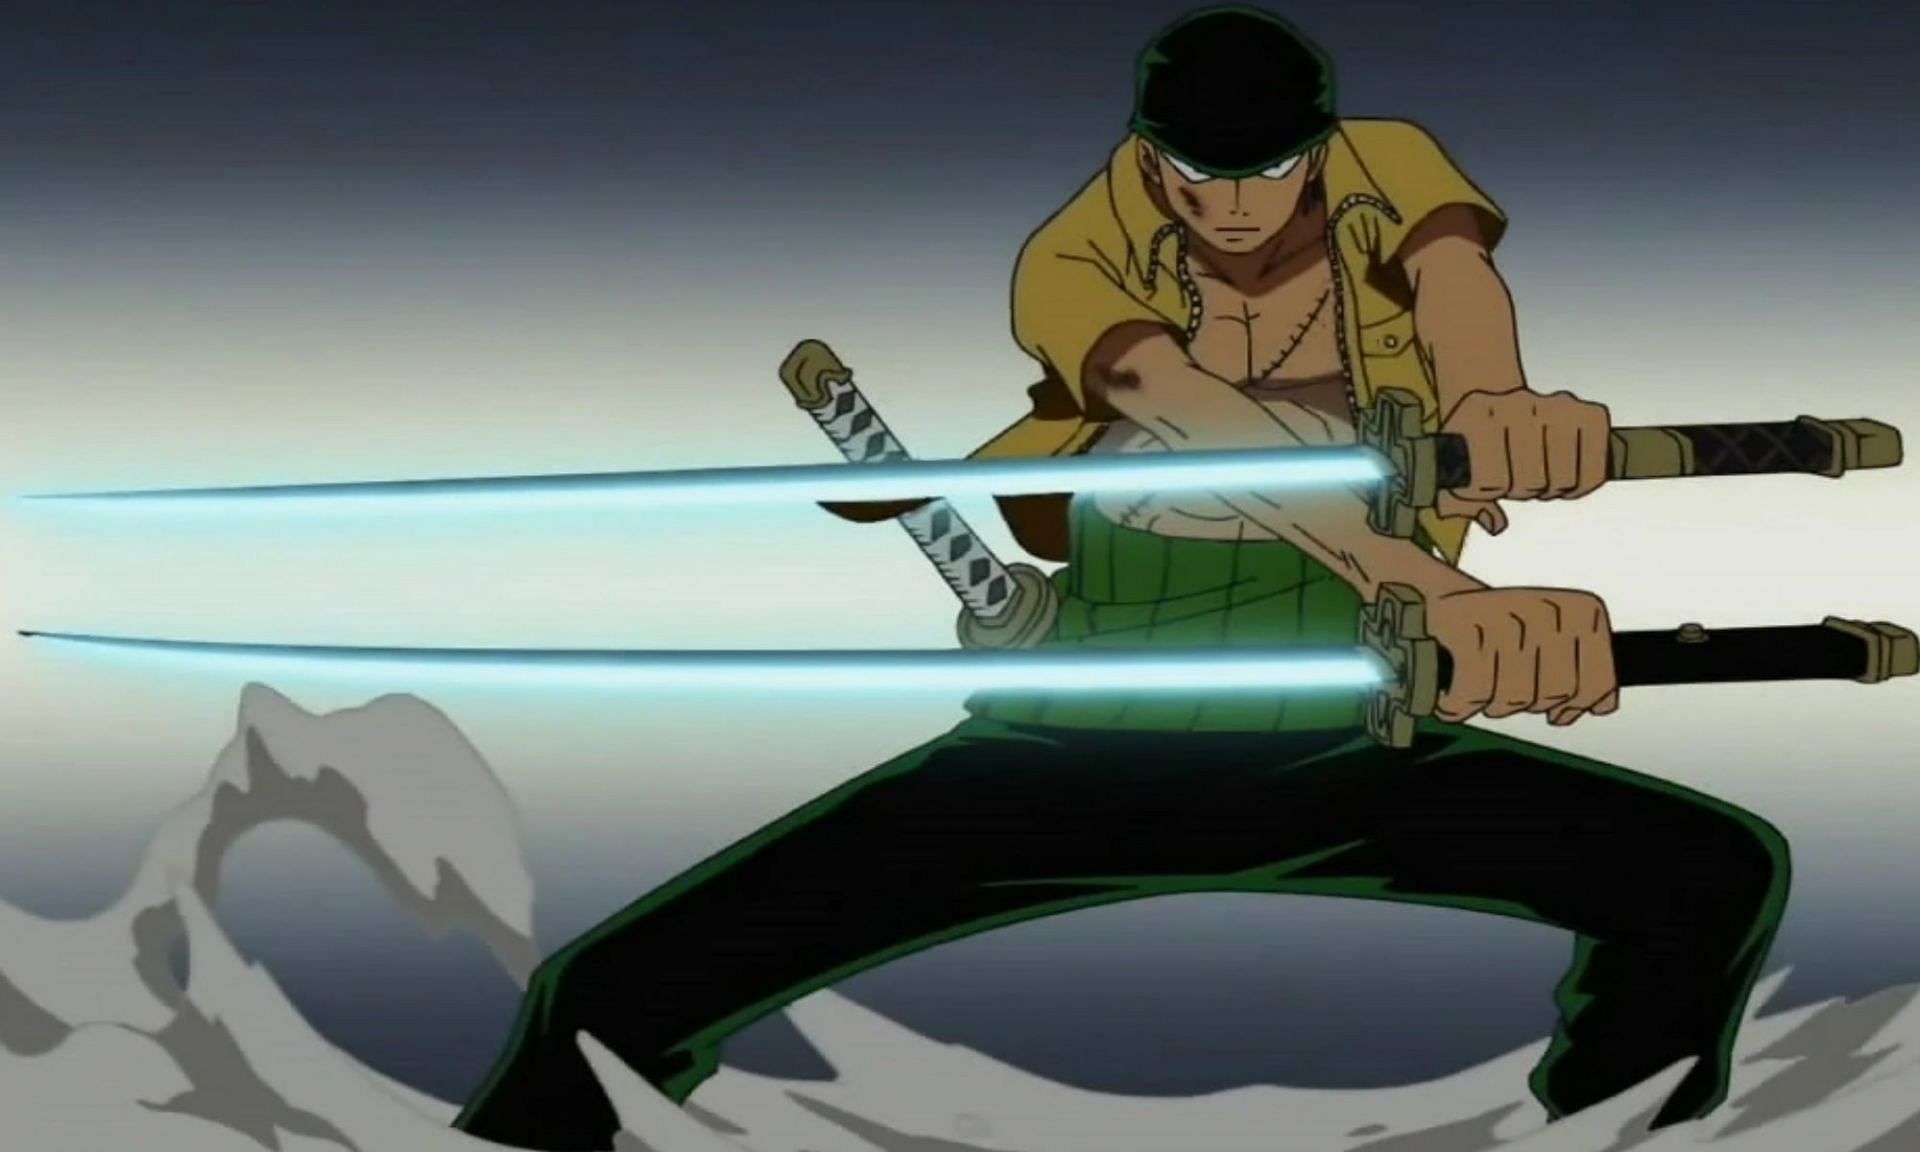 Zoro readies himself for a powerful attack (Image via Toei Animation)